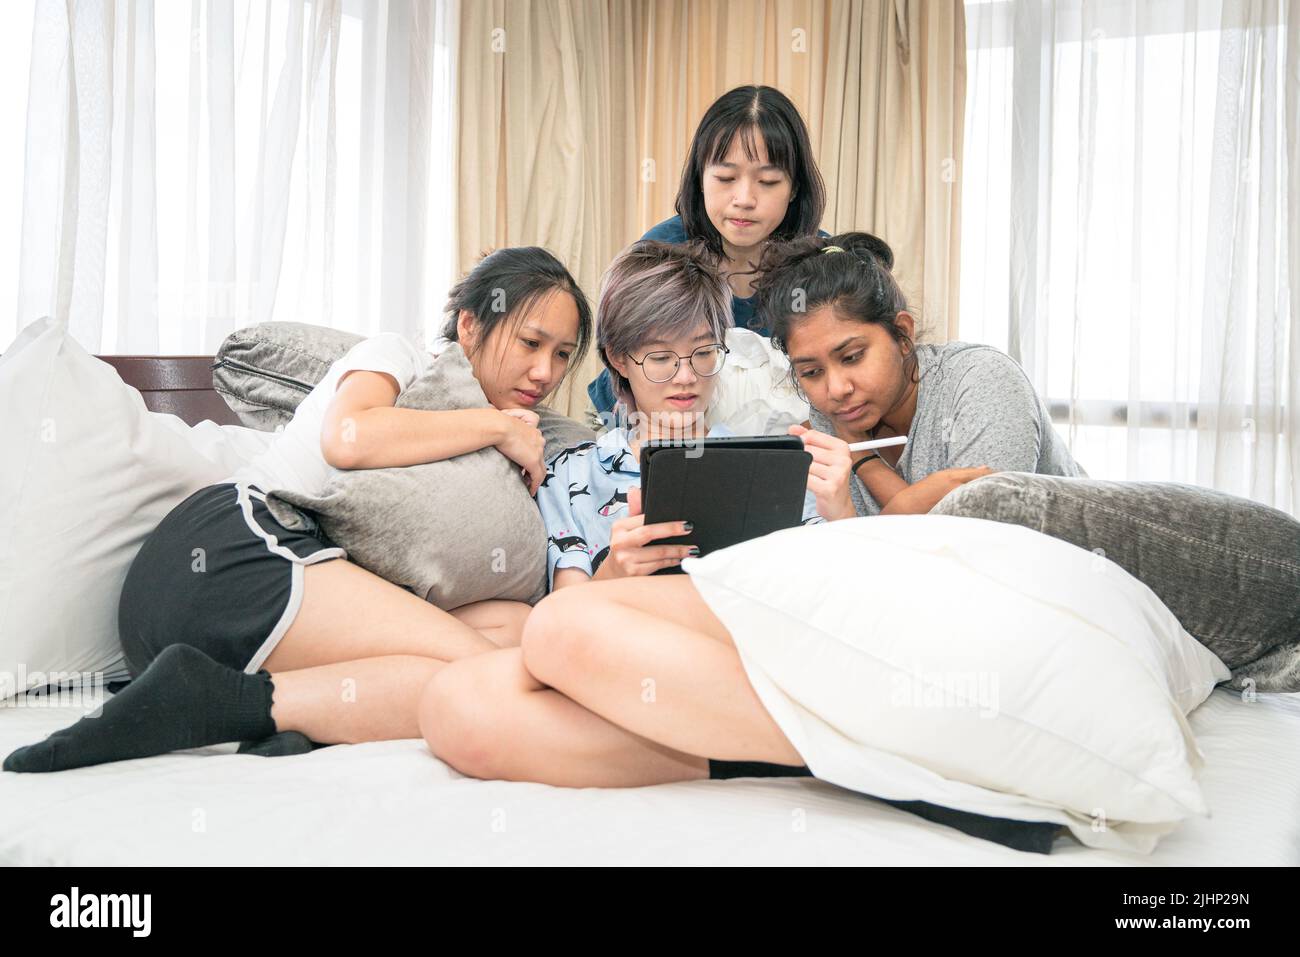 Young multi-ethnic women lying on bed browsing digtial tablet together. Digital lifestyle or sleepover concept. Stock Photo